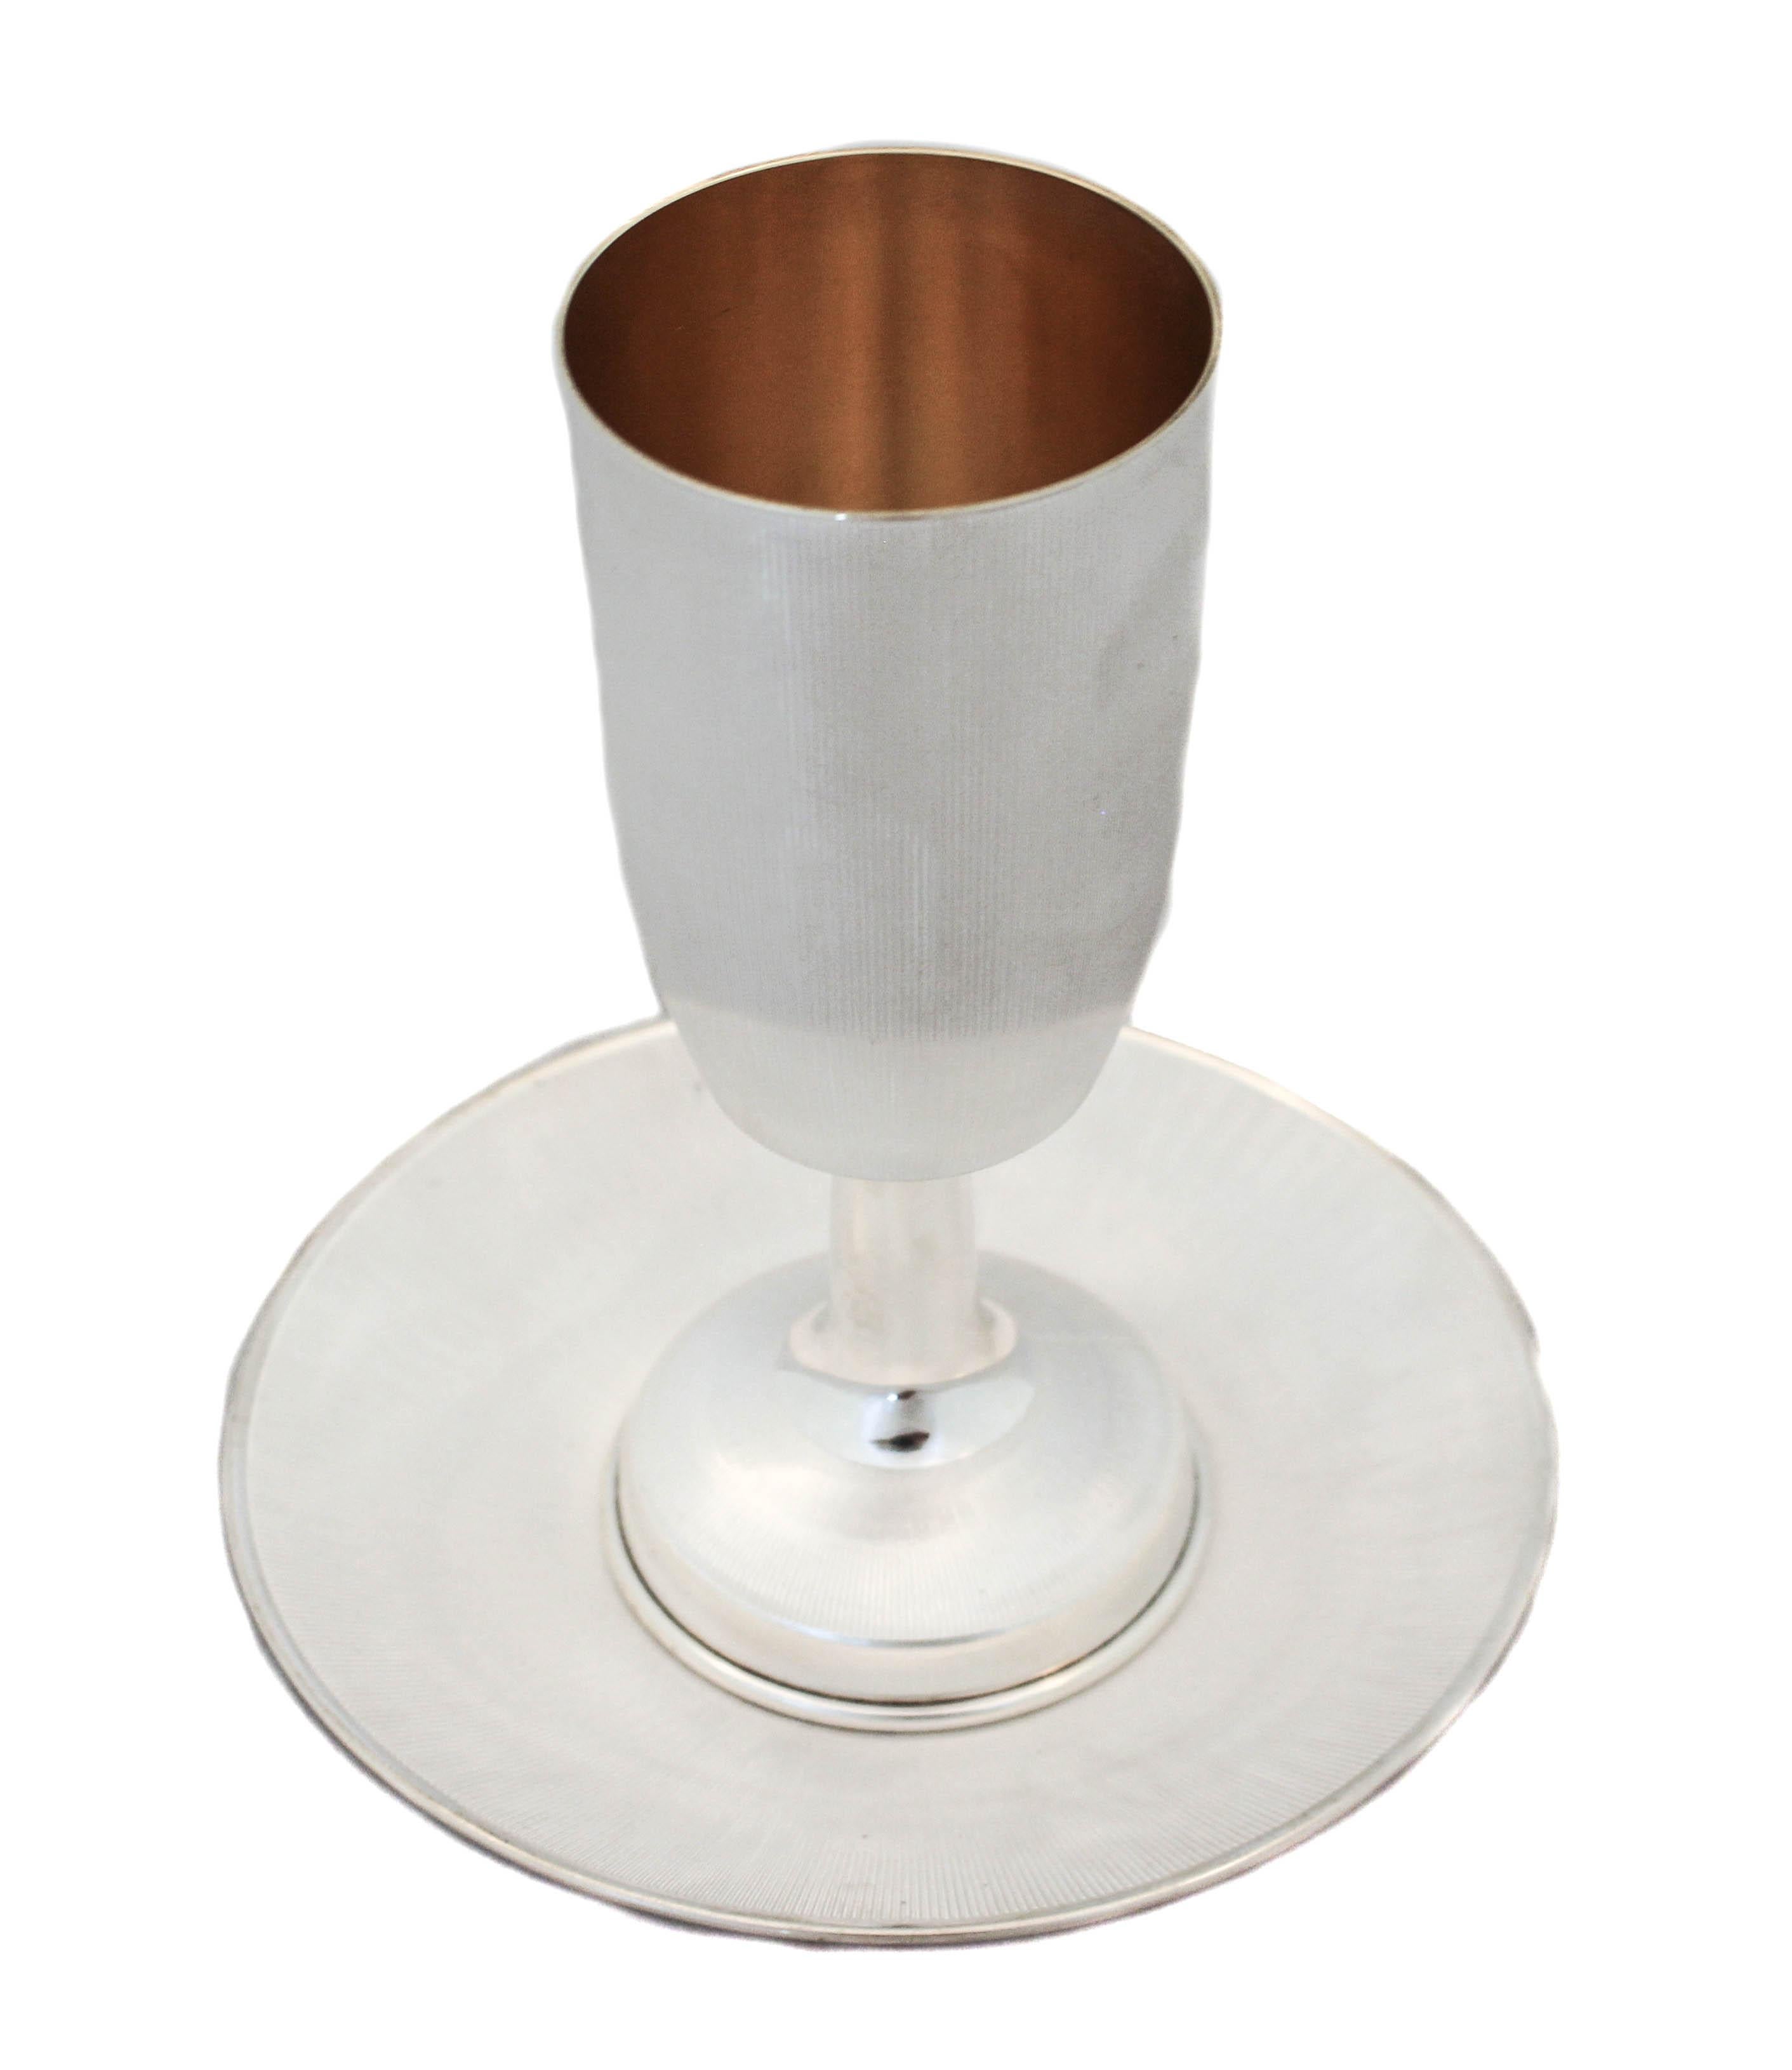 We are just gaga over this sterling silver Kiddush cup and plate. It has a matt finish and very thin ridges around the goblet and base, as well as the plate. Very handsome and masculine, it’s sure to dress up your table!